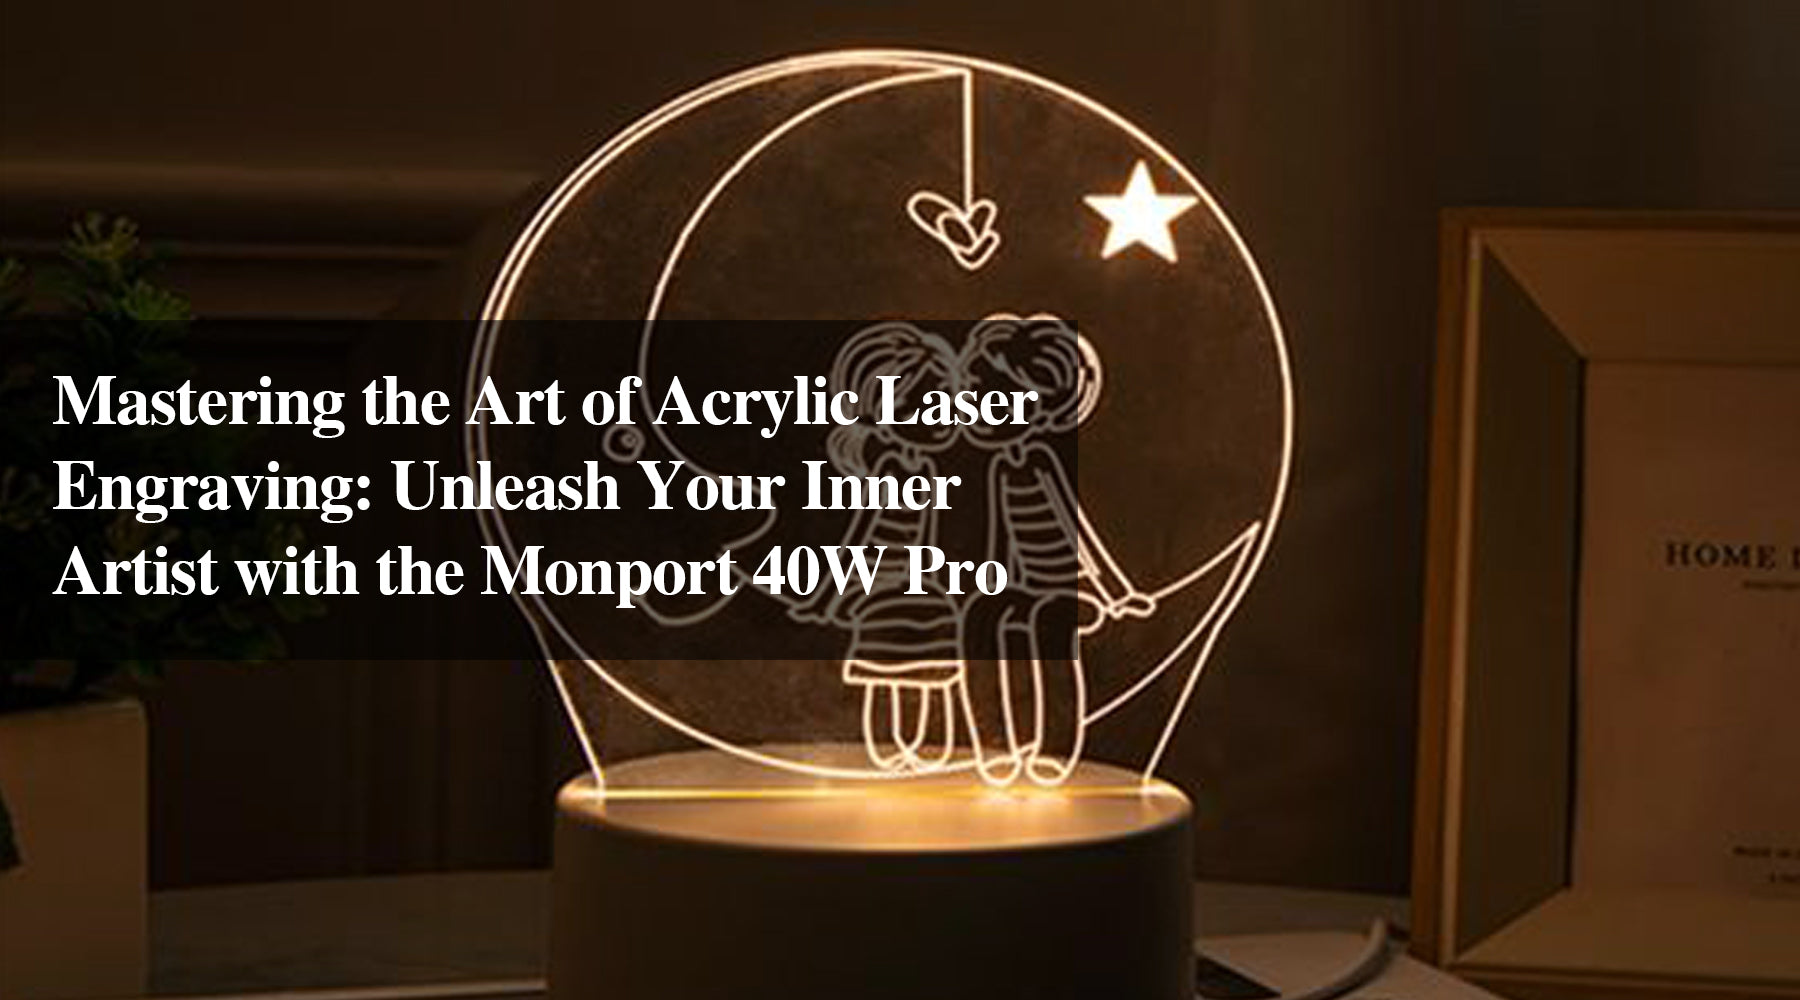 Tricks to Engrave Acrylic Laser Perfectly